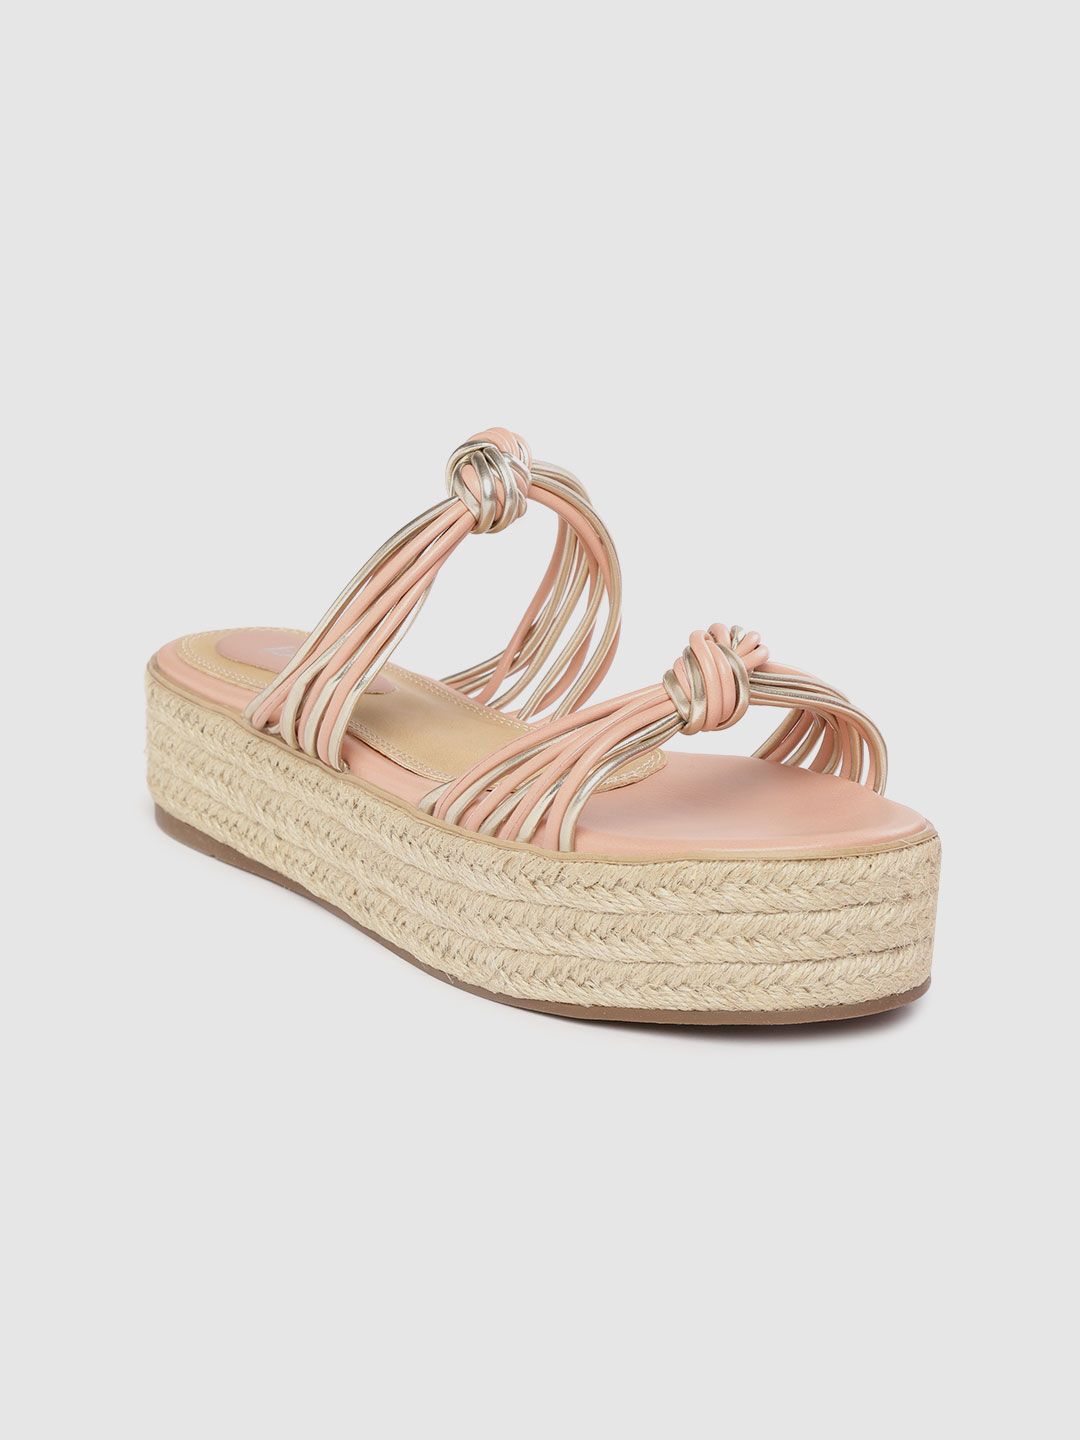 Lavie Women Peach-Coloured & Gold-Toned Solid Flatform Heels with Knot Detail Price in India